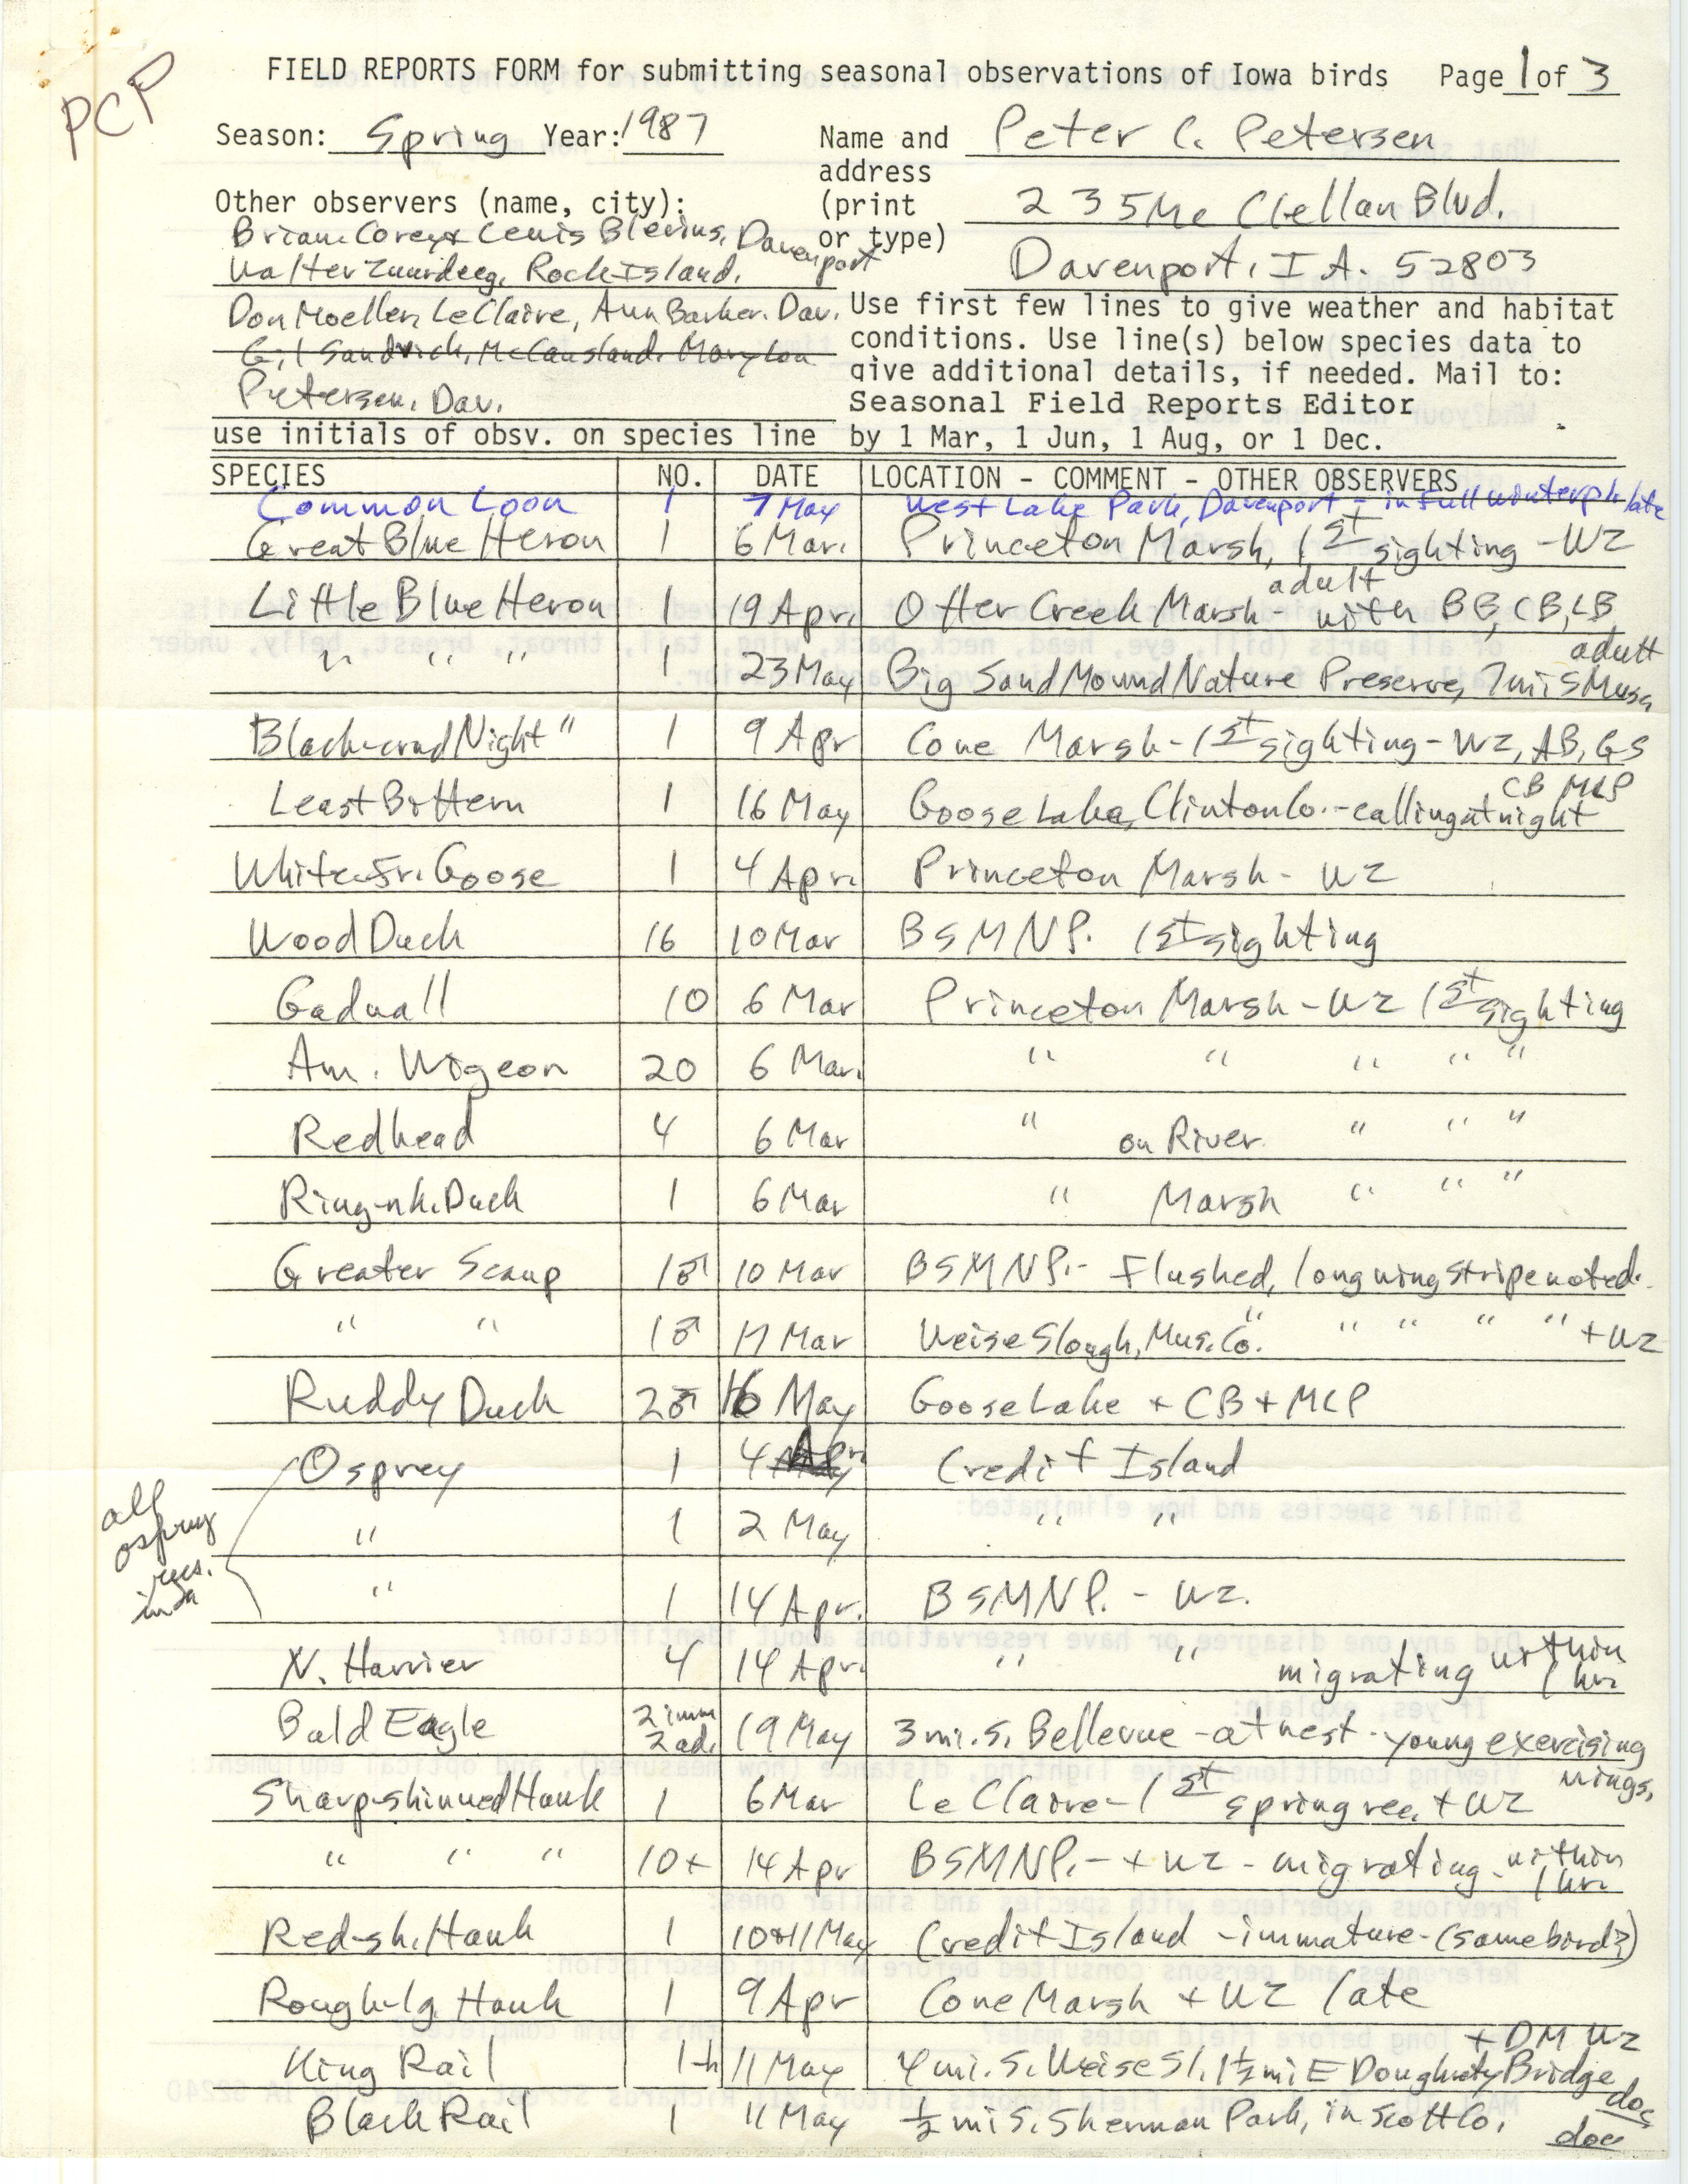 Field reports form for submitting seasonal observations of Iowa birds, Peter C. Petersen, spring 1987